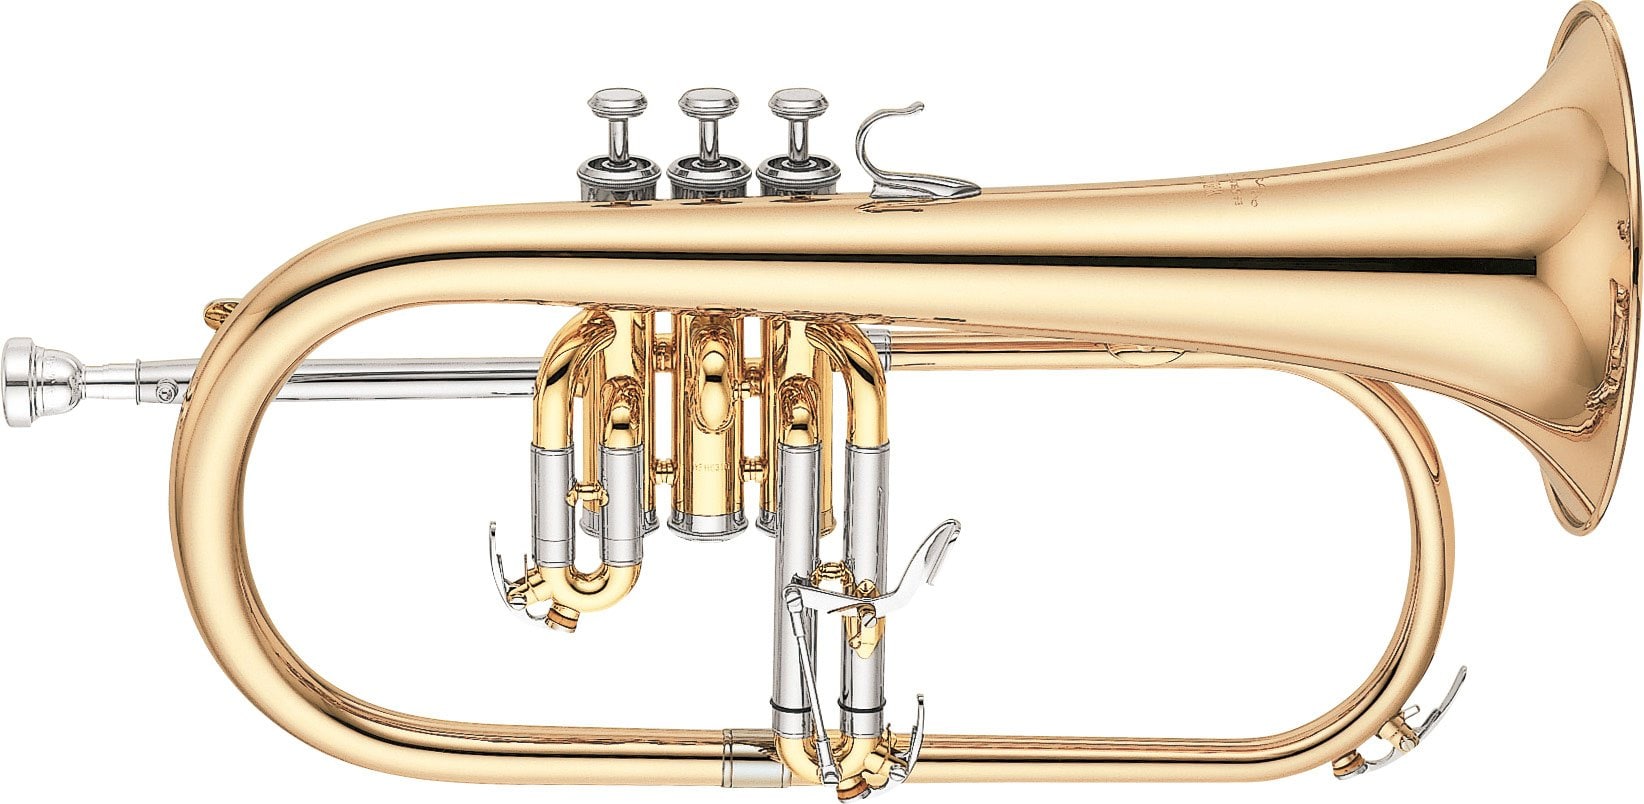 Yamaha YFH631G Flugel professional series, Gold brass bell and trigger outfit